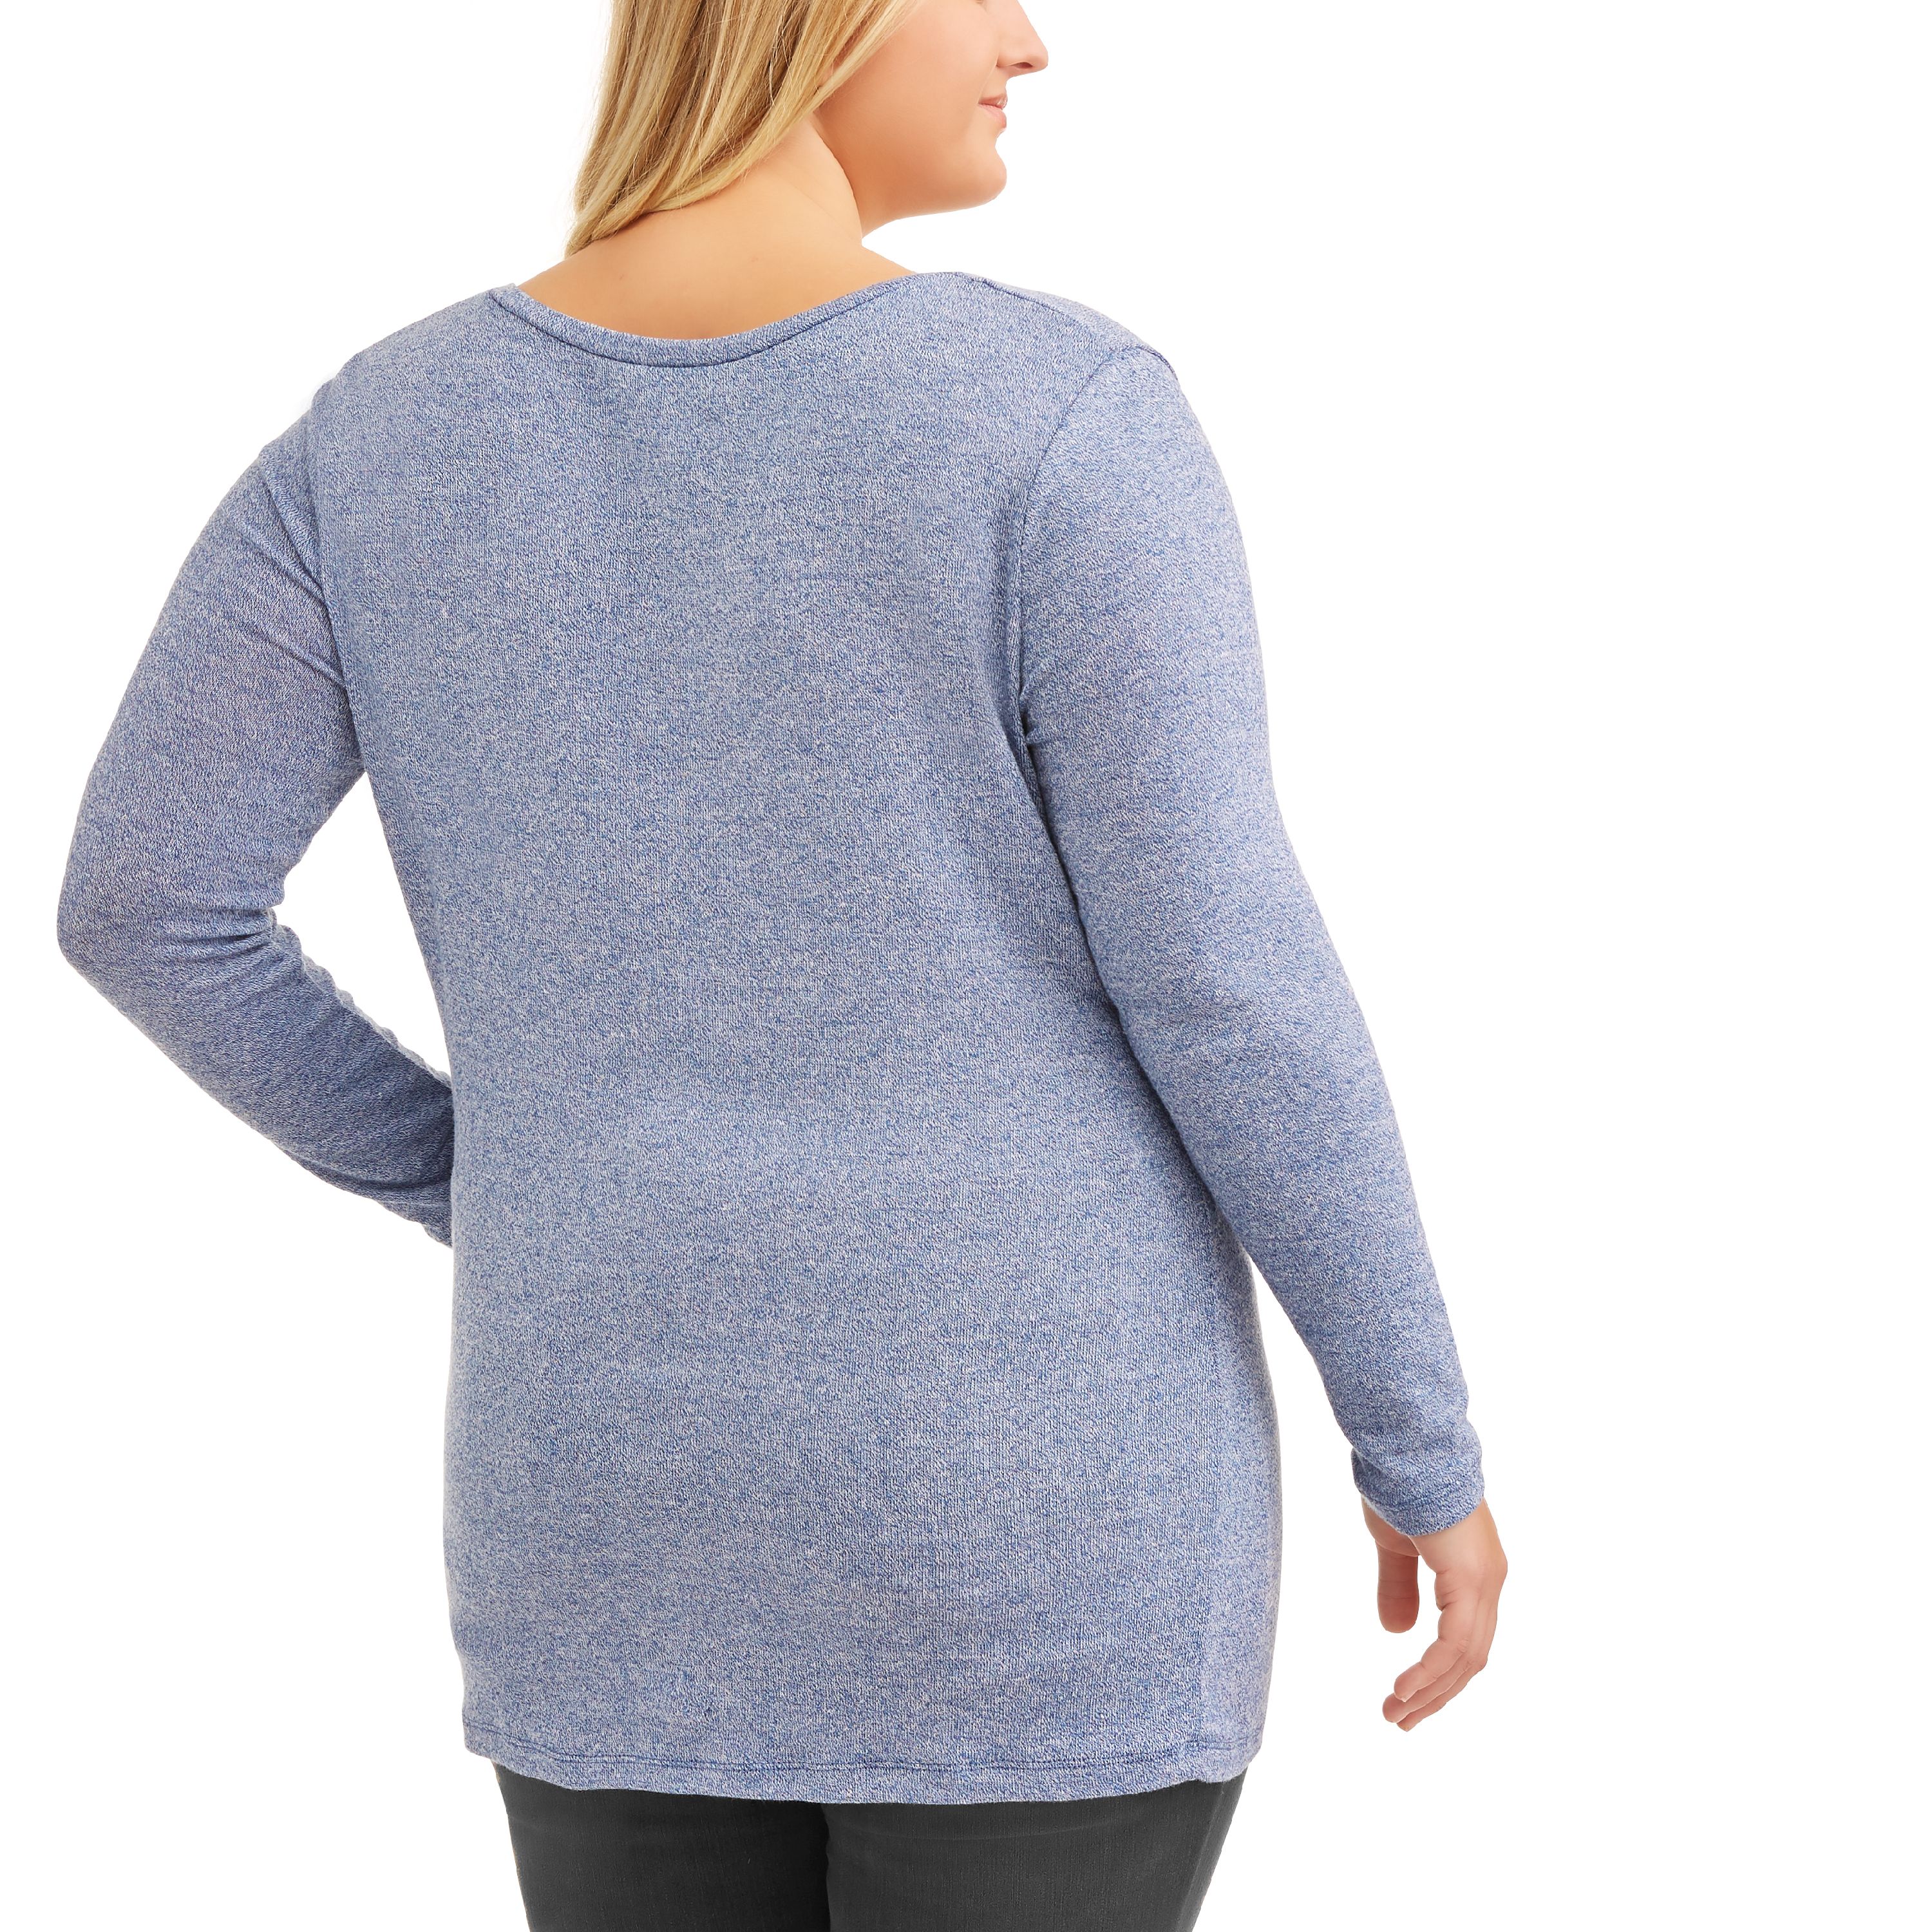 Plus Size Long Sleeve Strappy V-Neck Tee - image 2 of 3